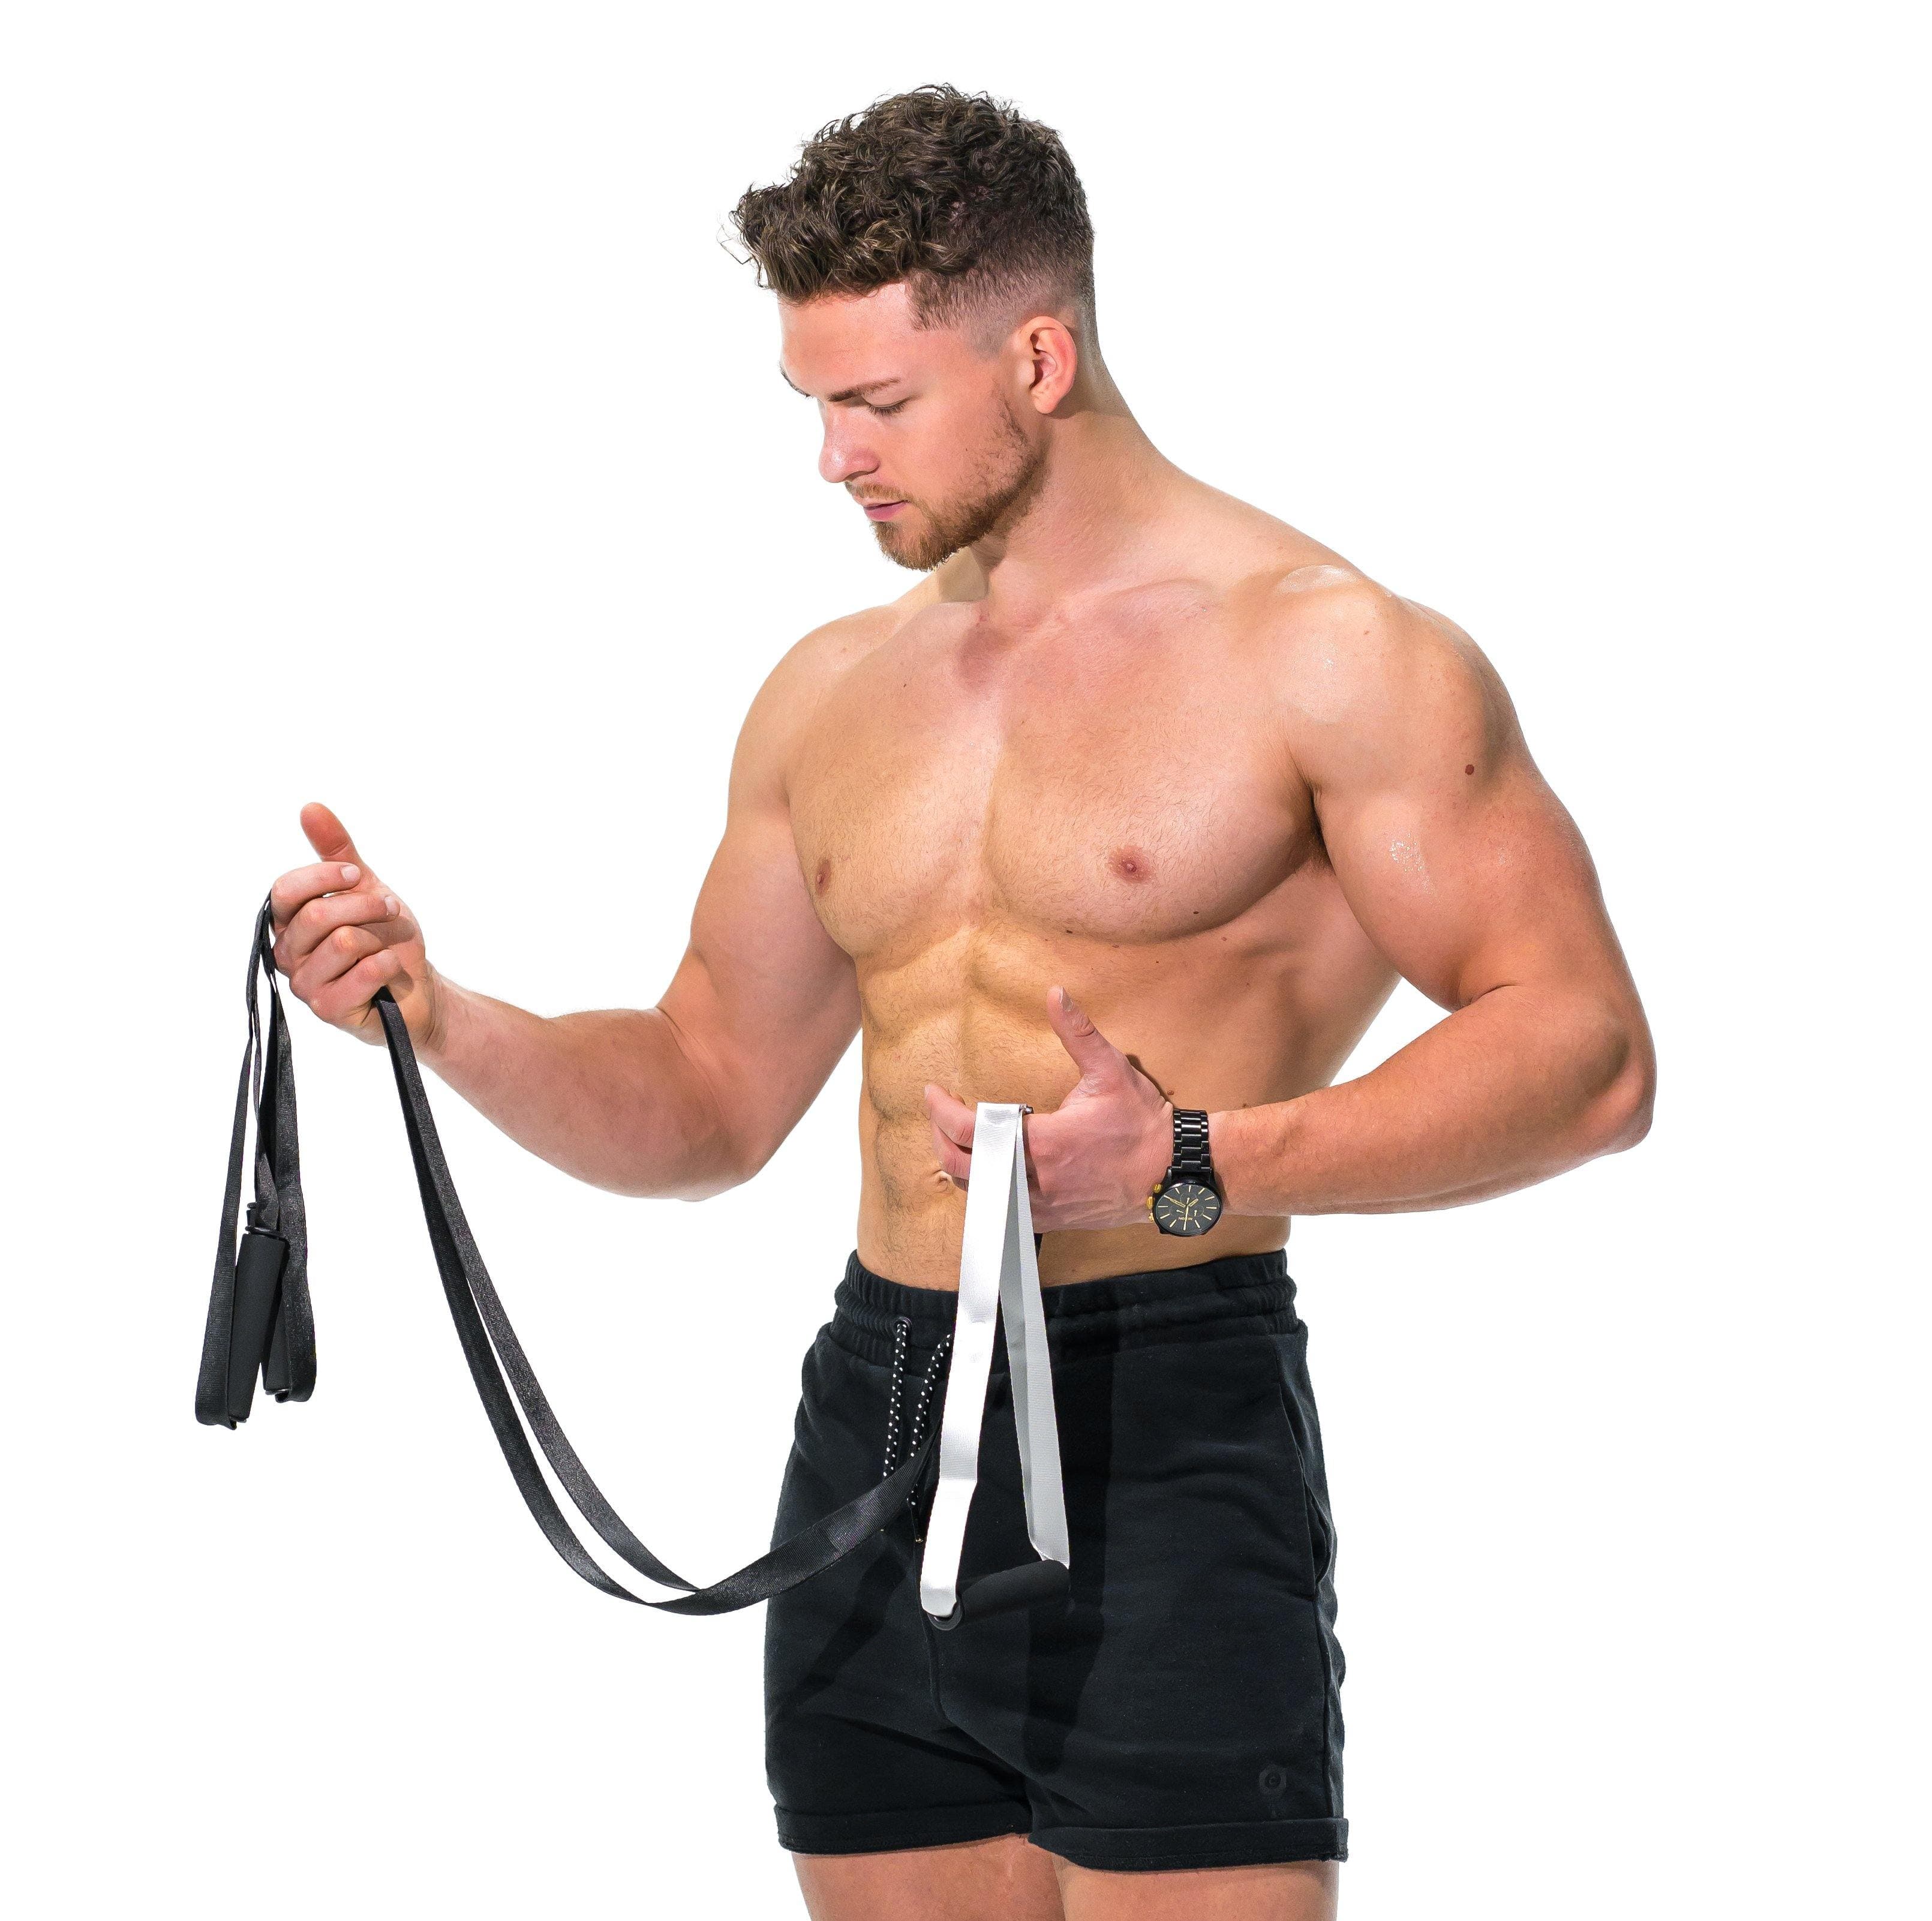 Man modeling the Redge Fit Capsule Available at https://www.getredge.com/products/redge-fit-capsule